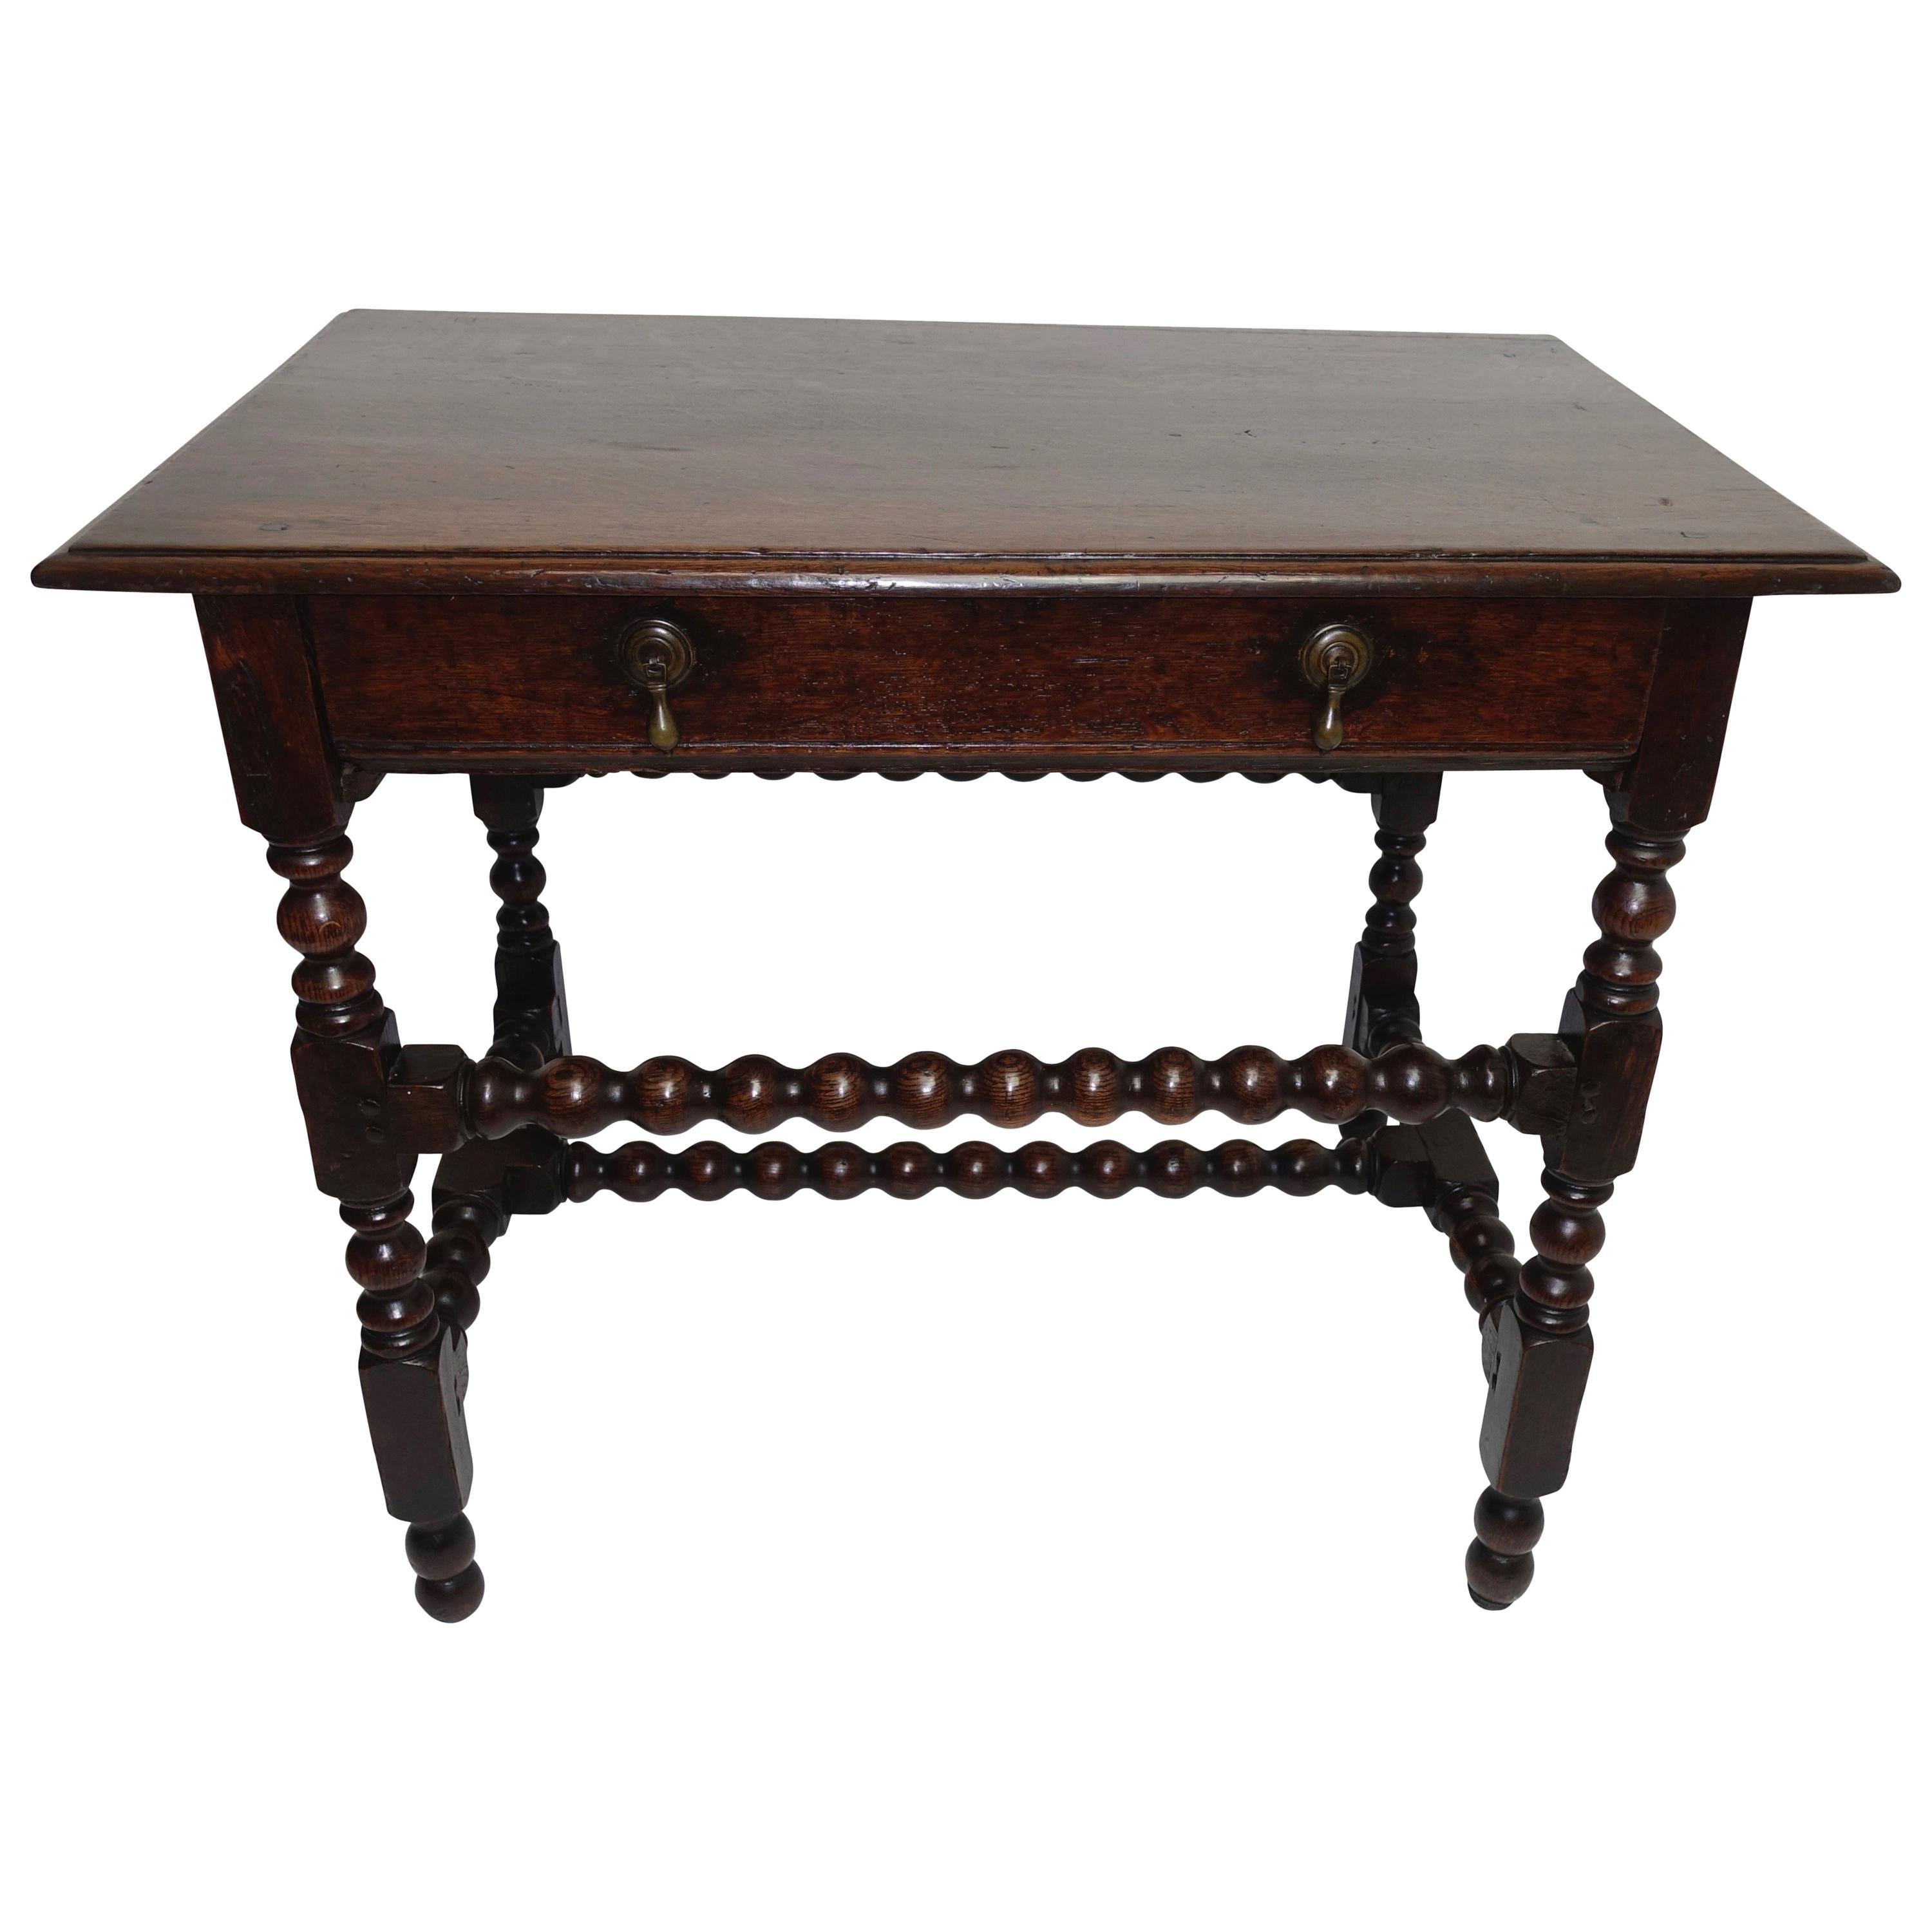 Oak Side Table or Writing Table, English Early 18th Century